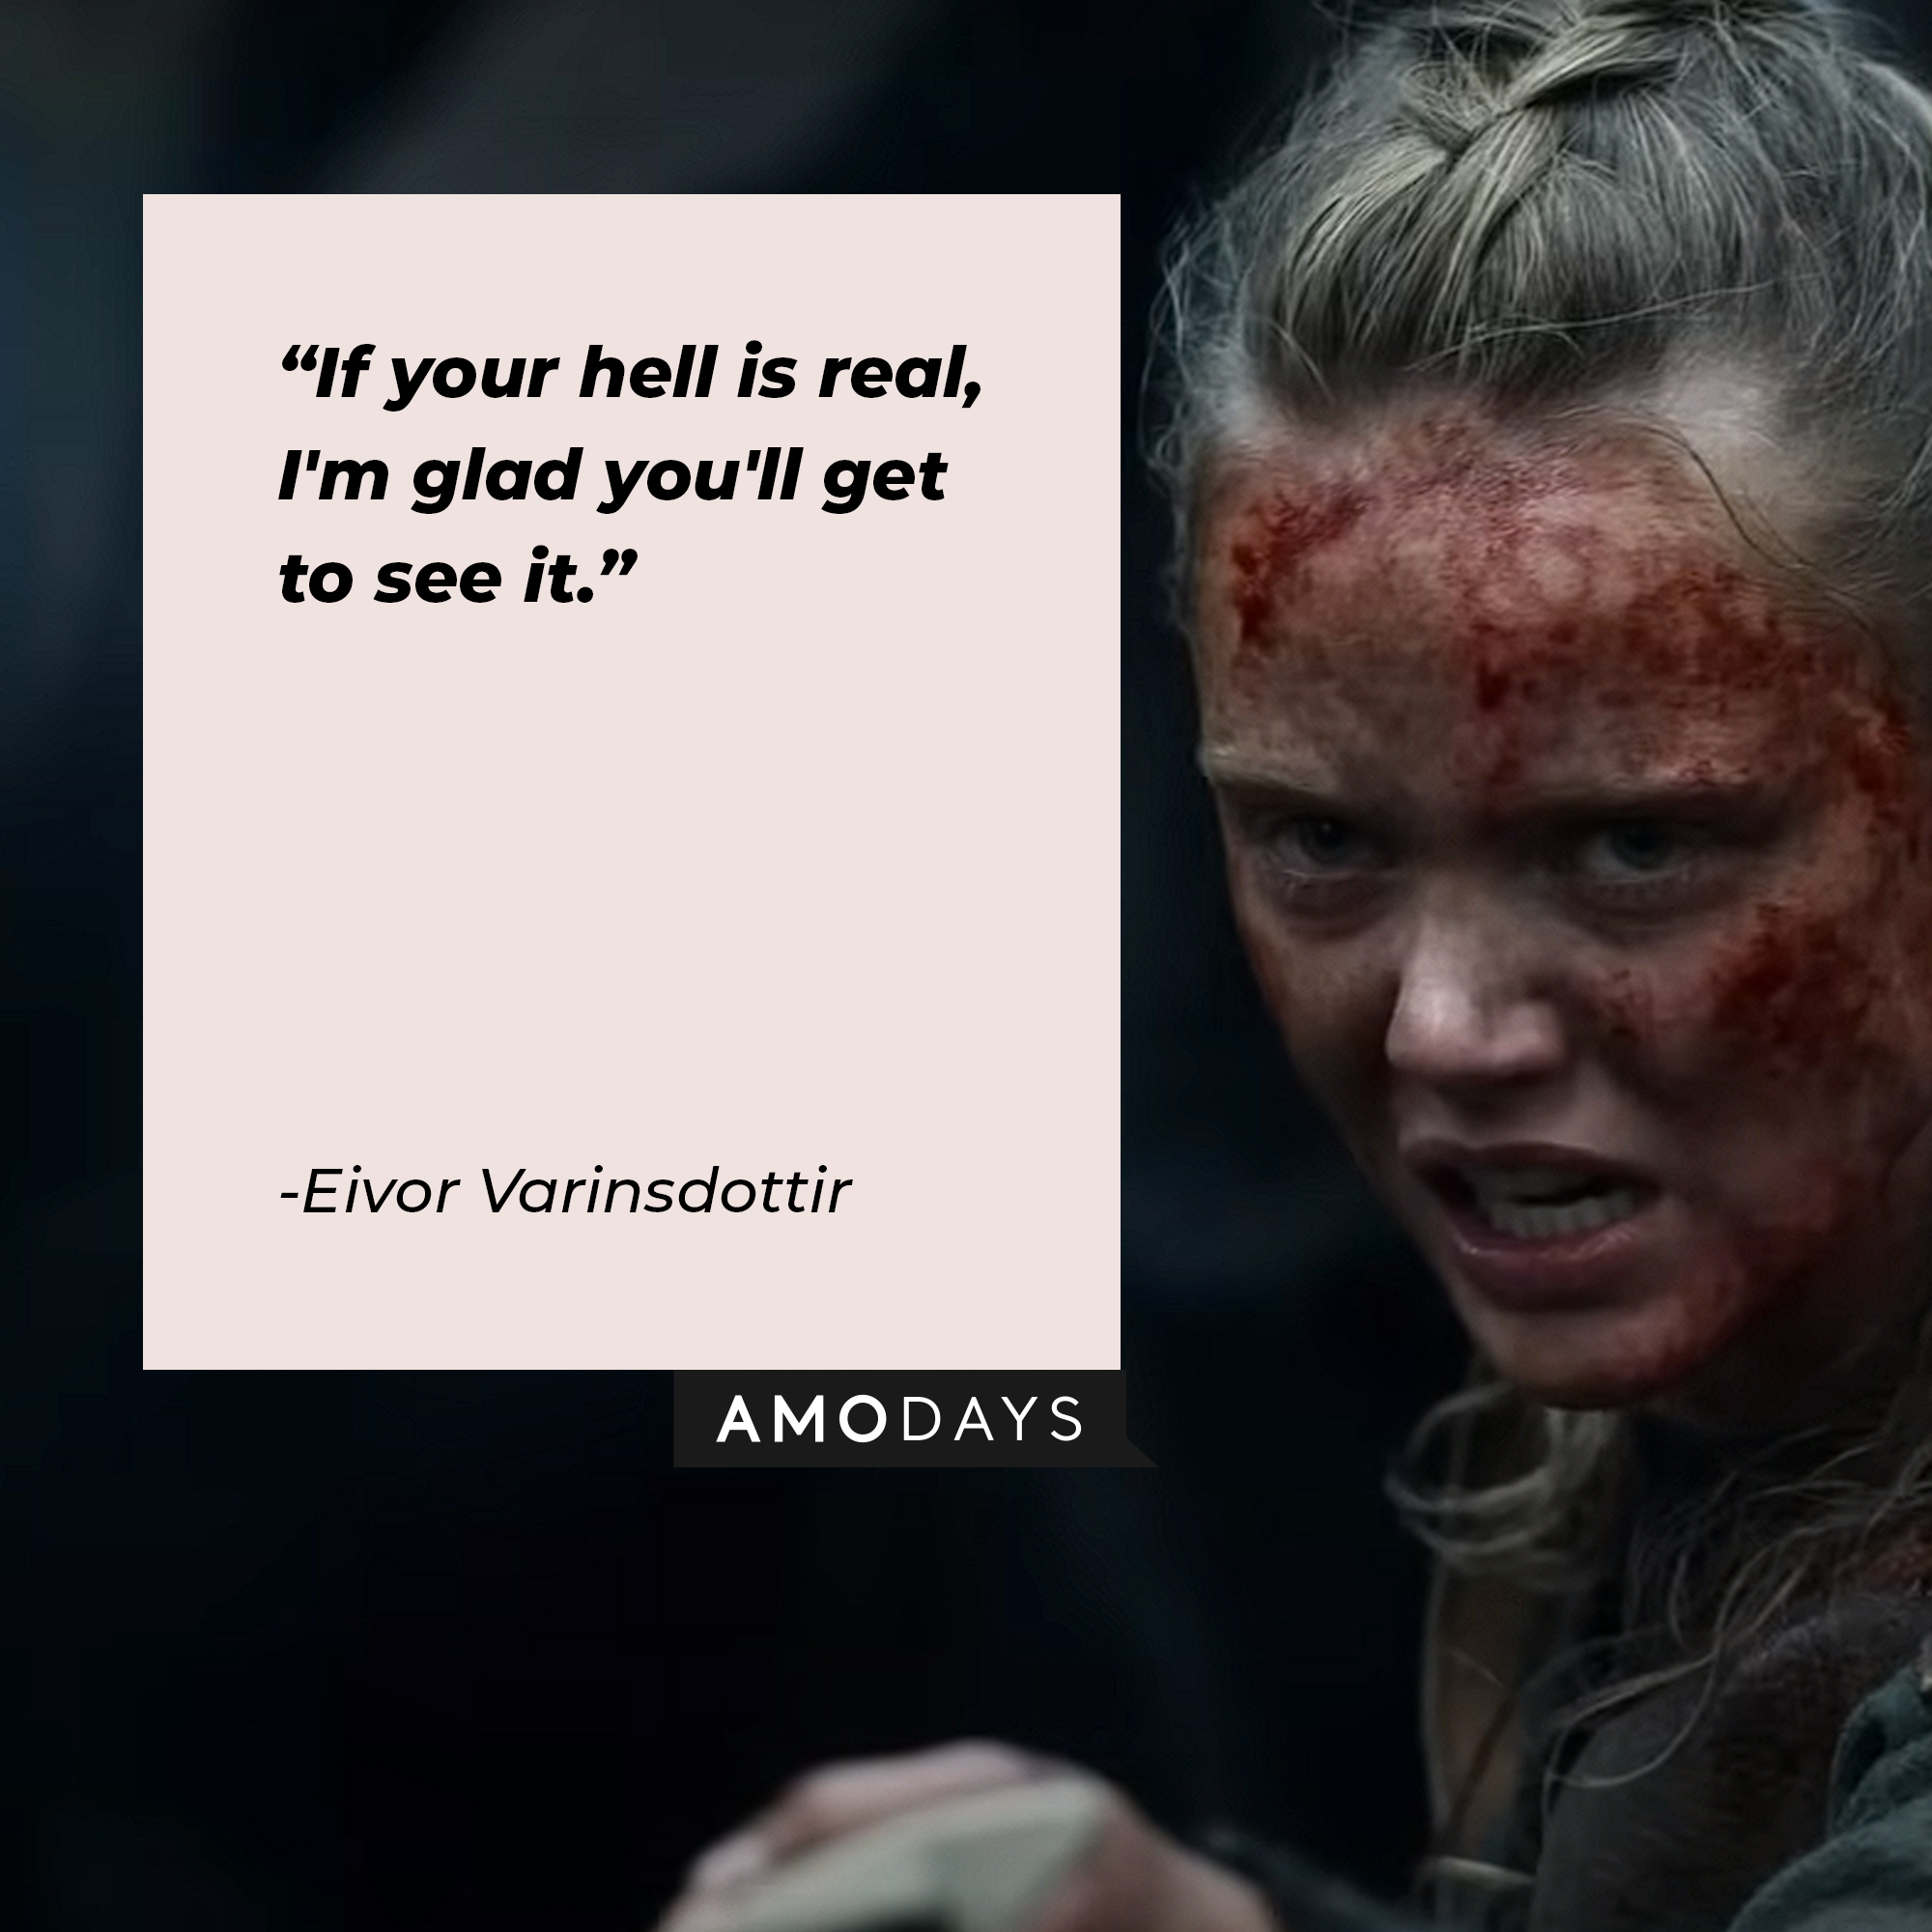 Eivor Varinsdottir's quote: "If your hell is real, I'm glad you'll get to see it." | Image: youtube.com/Netflix